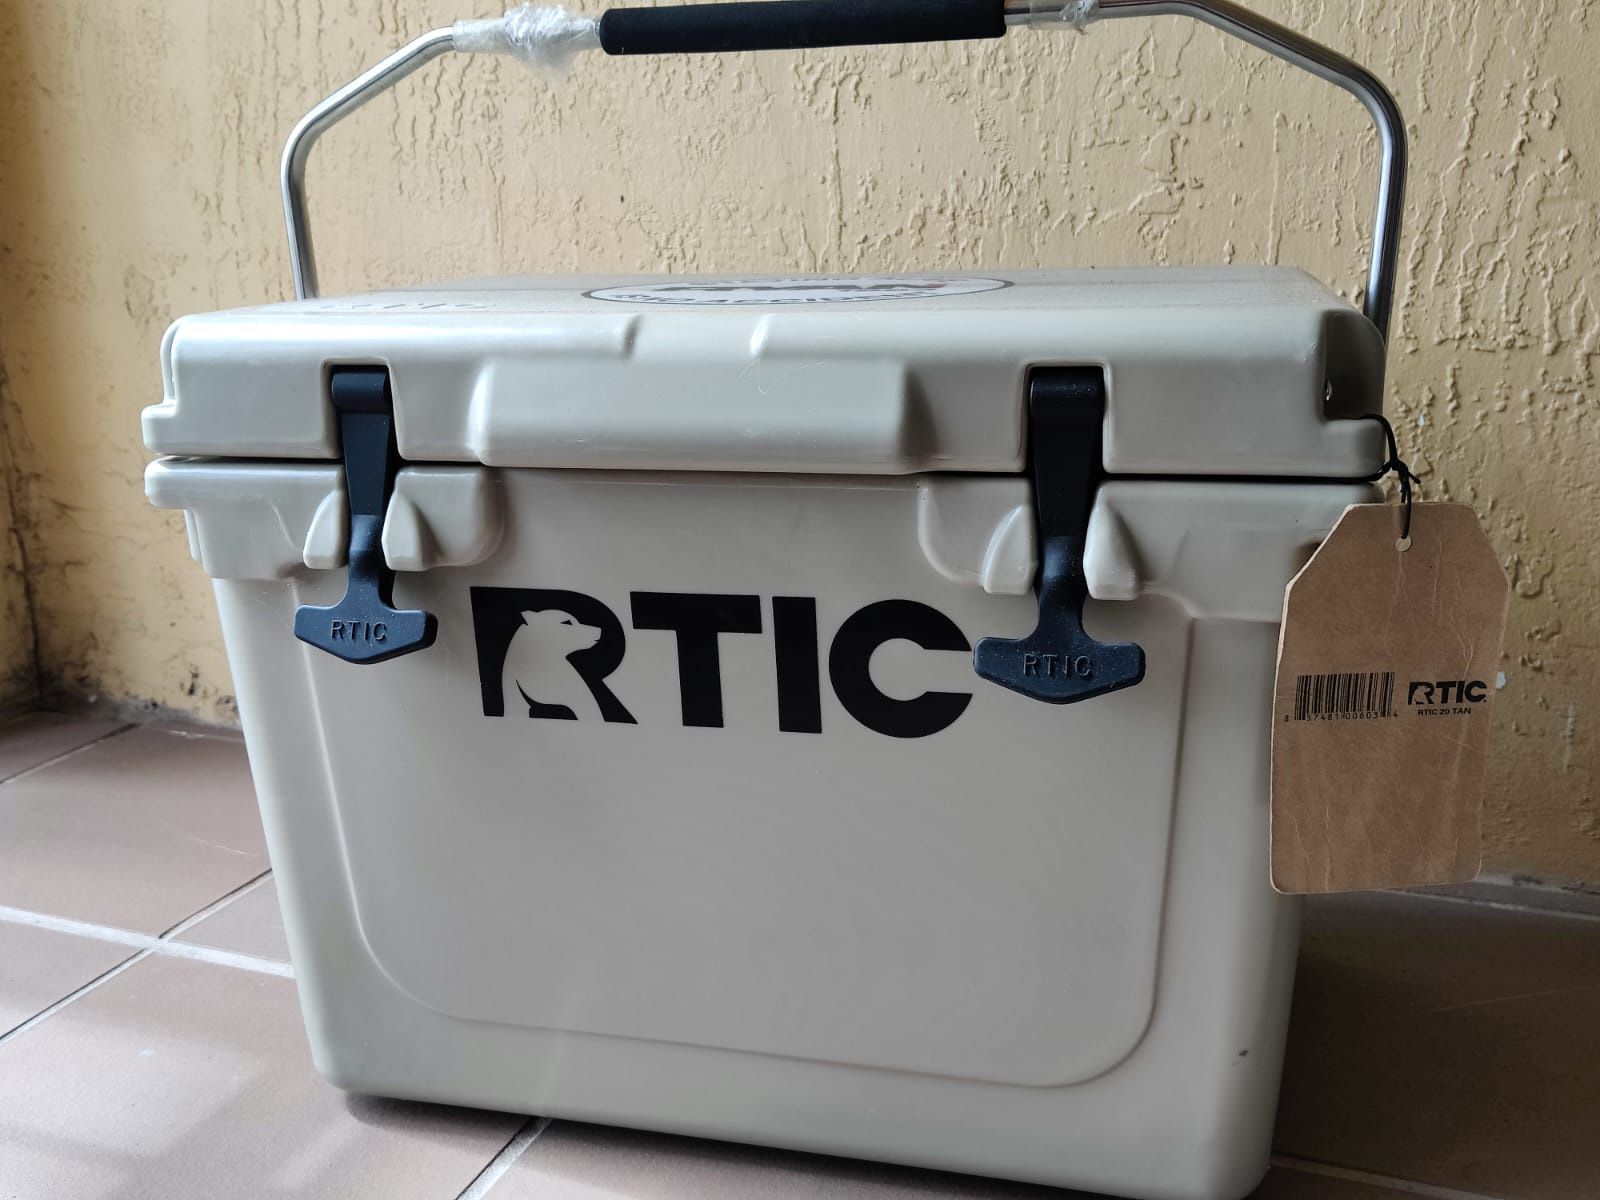 RTIC 45 qt Hard Cooler Insulated Portable Ice Chest Box for Beach, Drink,  Beverage, Camping, Picnic, Fishing, Boat, Barbecue, Navy/Orange (Limited  Edition Color) 